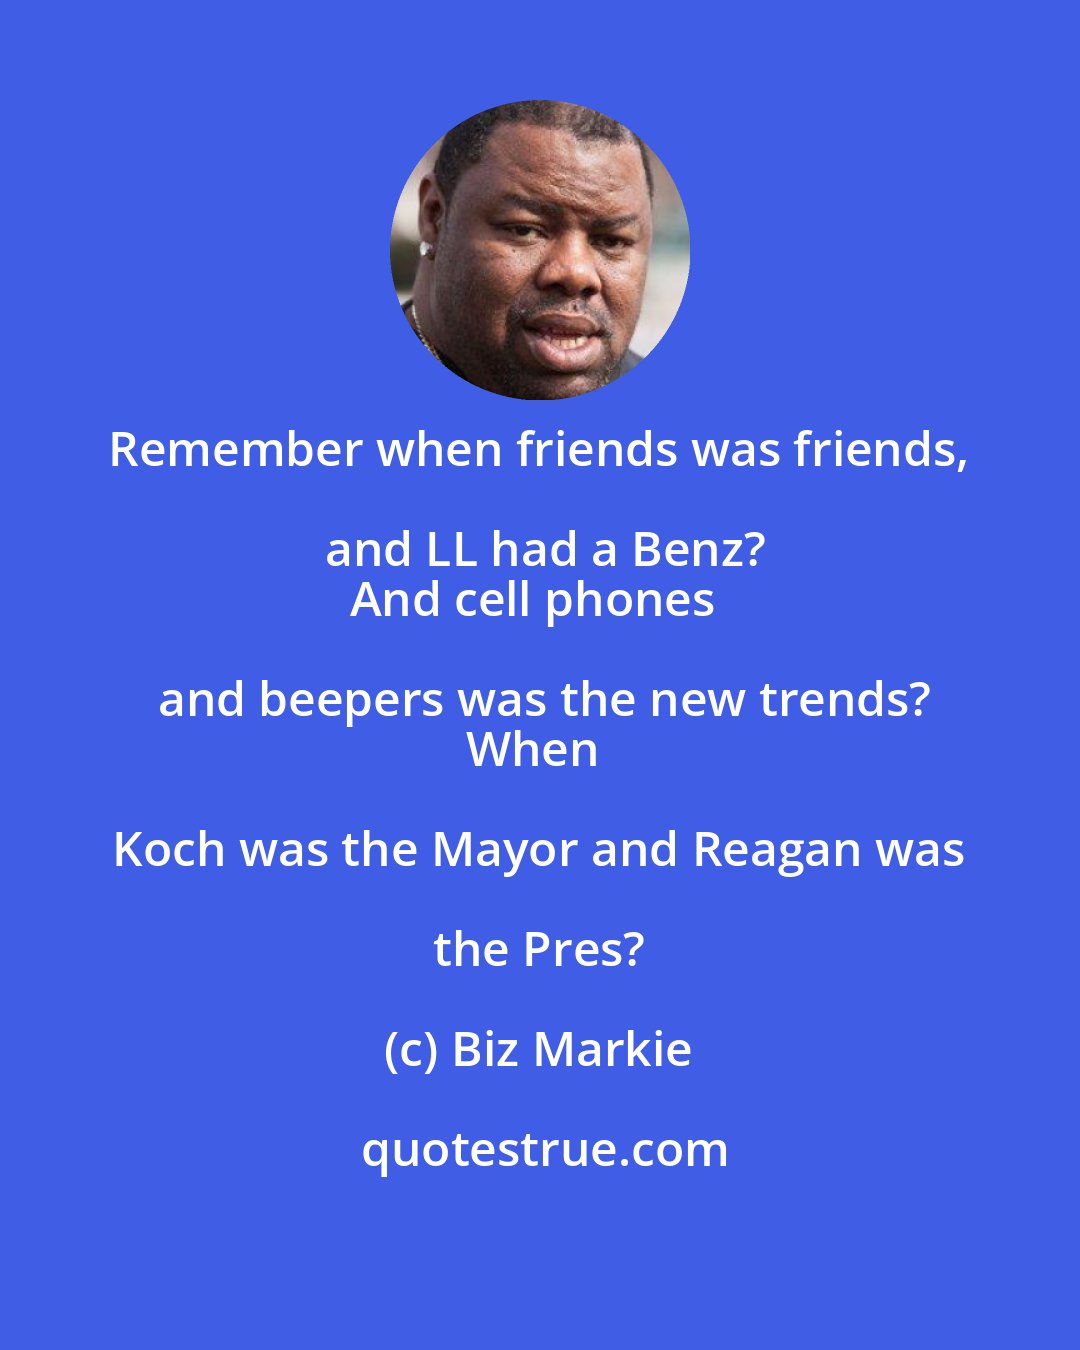 Biz Markie: Remember when friends was friends, and LL had a Benz?
And cell phones and beepers was the new trends?
When Koch was the Mayor and Reagan was the Pres?